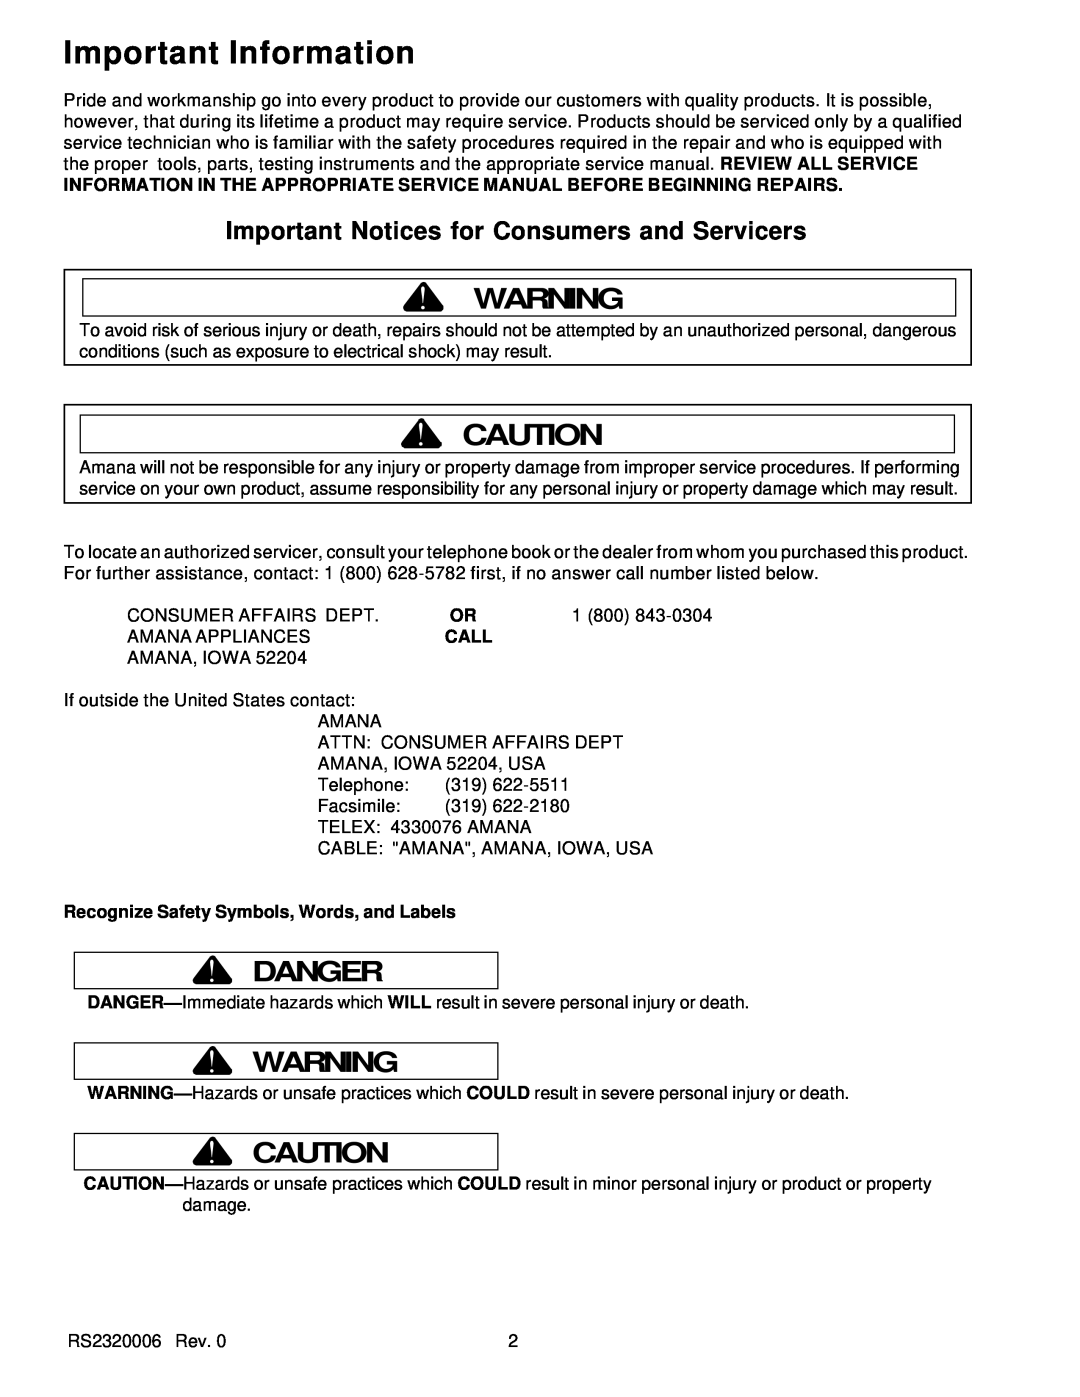 Amana RS2320006 service manual Important Information, Danger, Call, Recognize Safety Symbols, Words, and Labels 